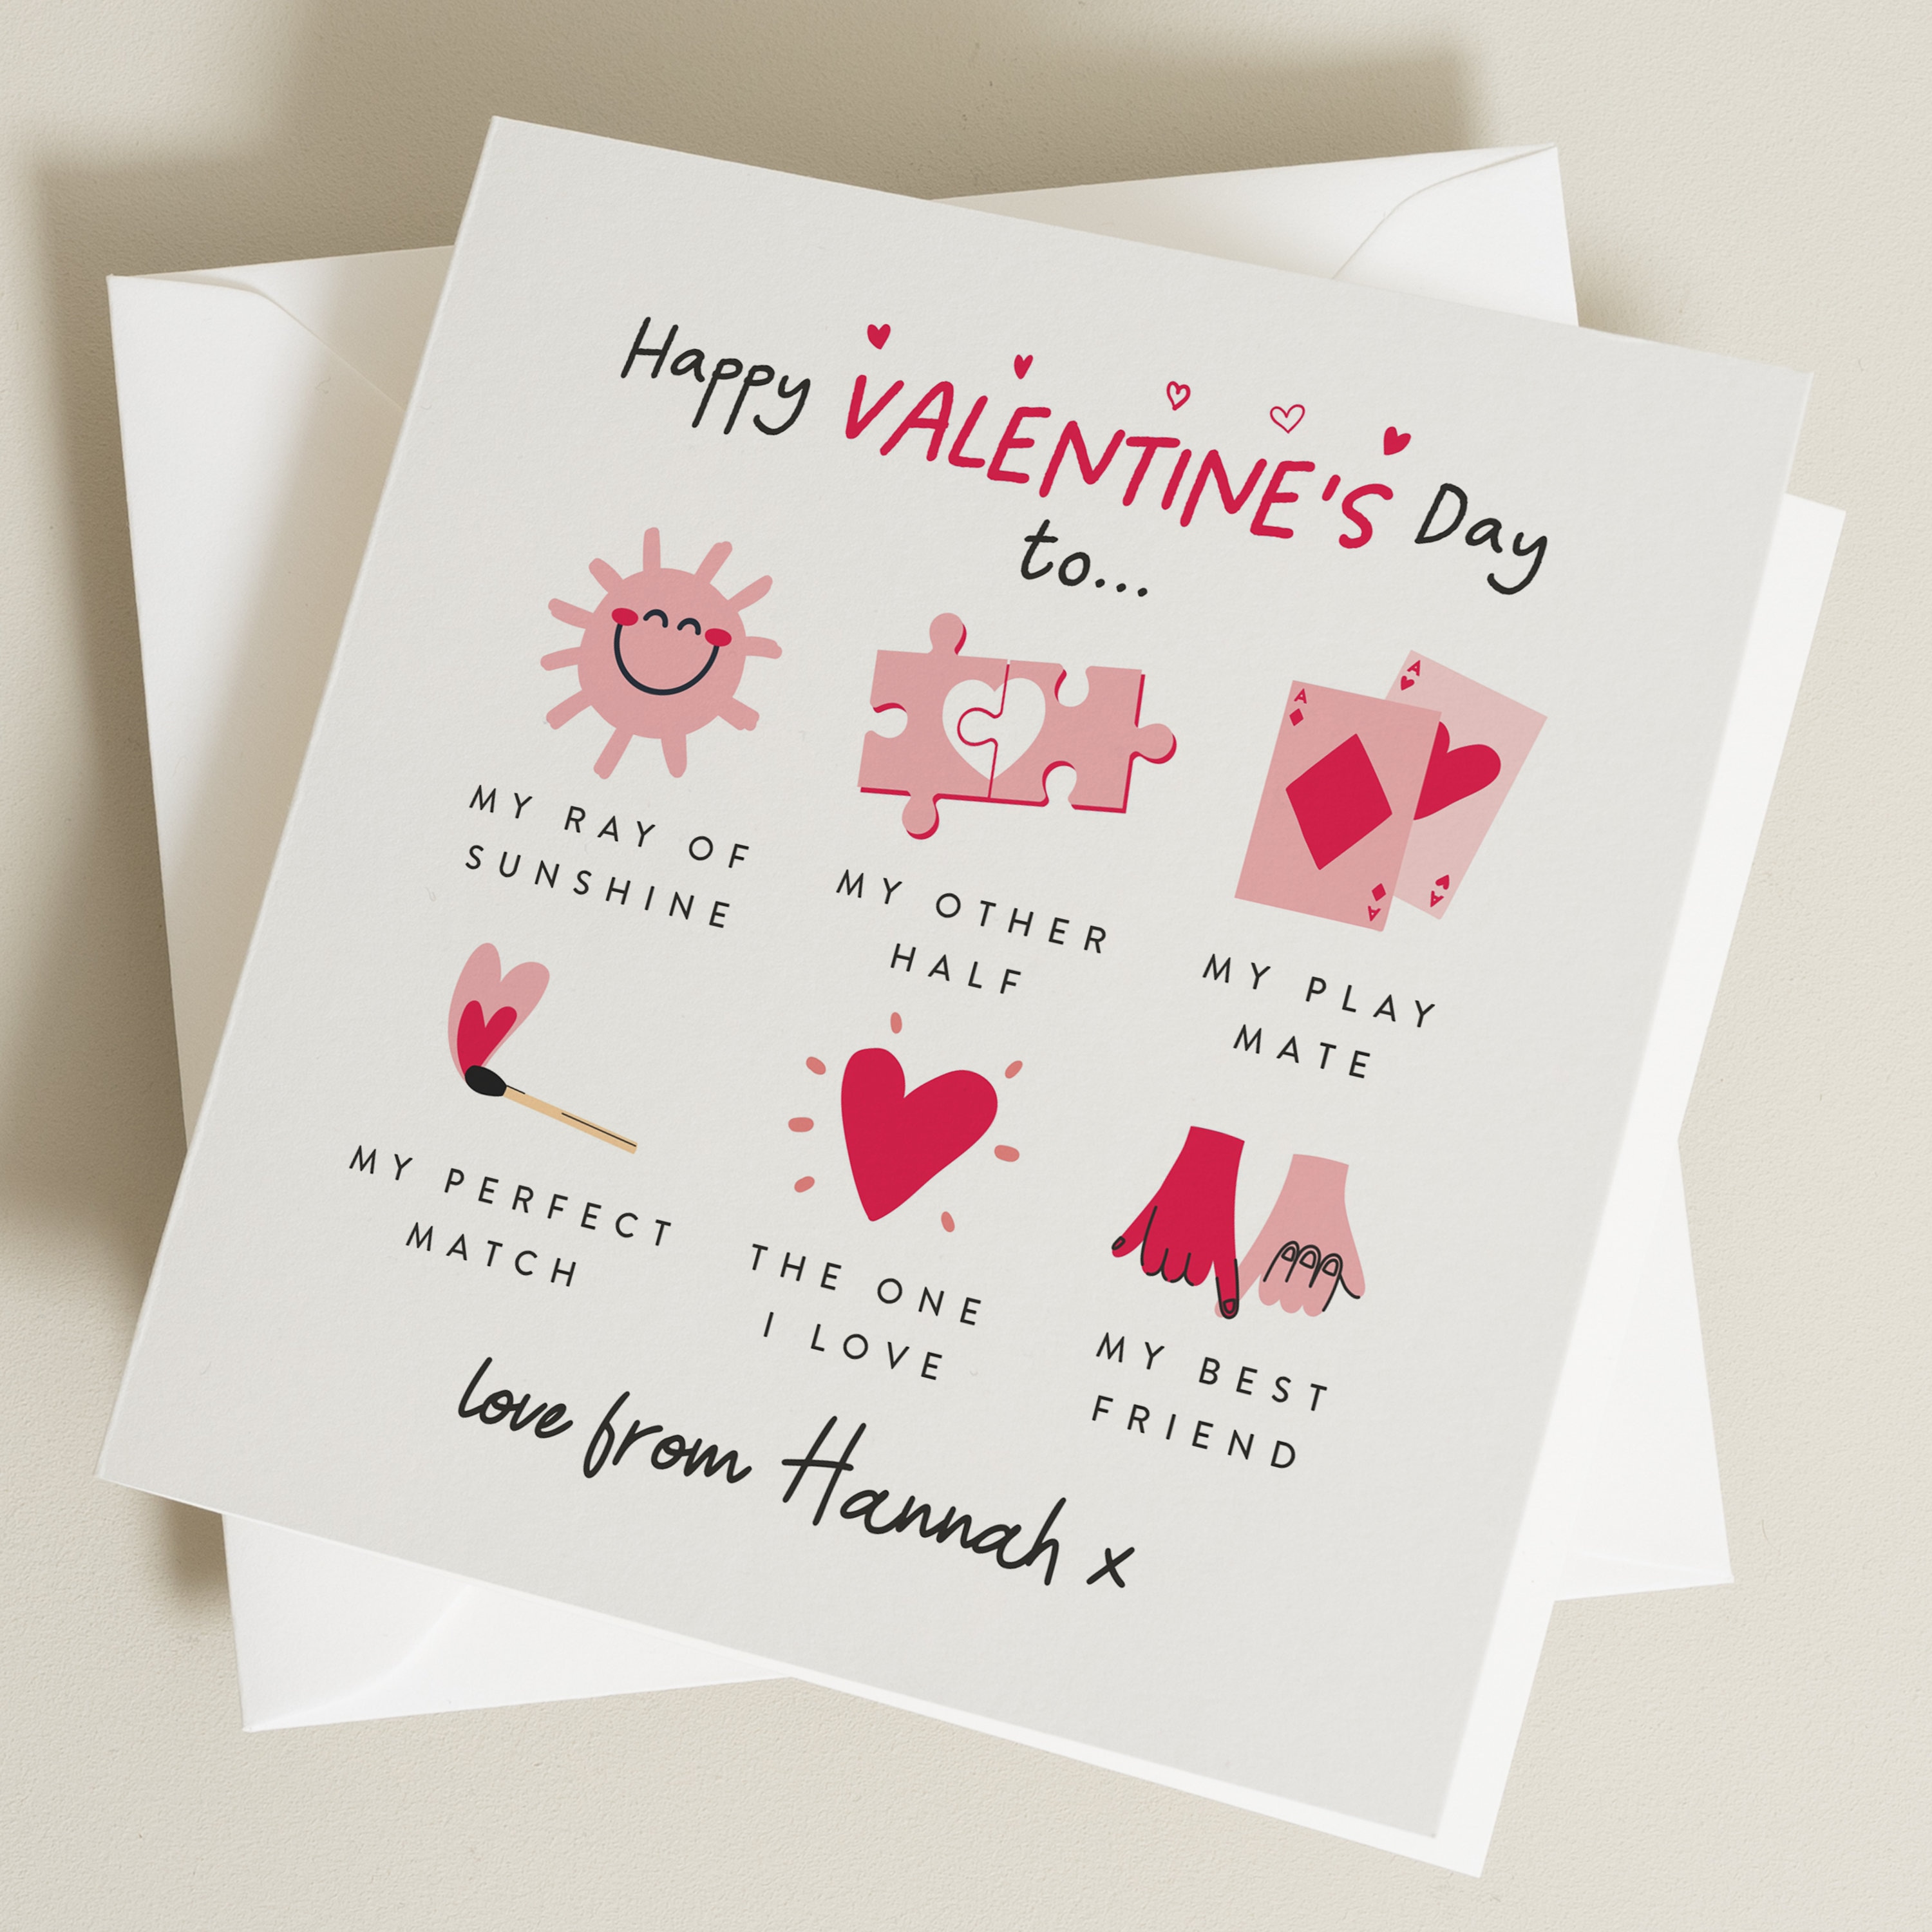 Valentines Day Card, Romantic Valentines Day, Valentines Day Card Poem, Valentine's  Card for Him or Her, Valentine's Gift, Be My Valentine 